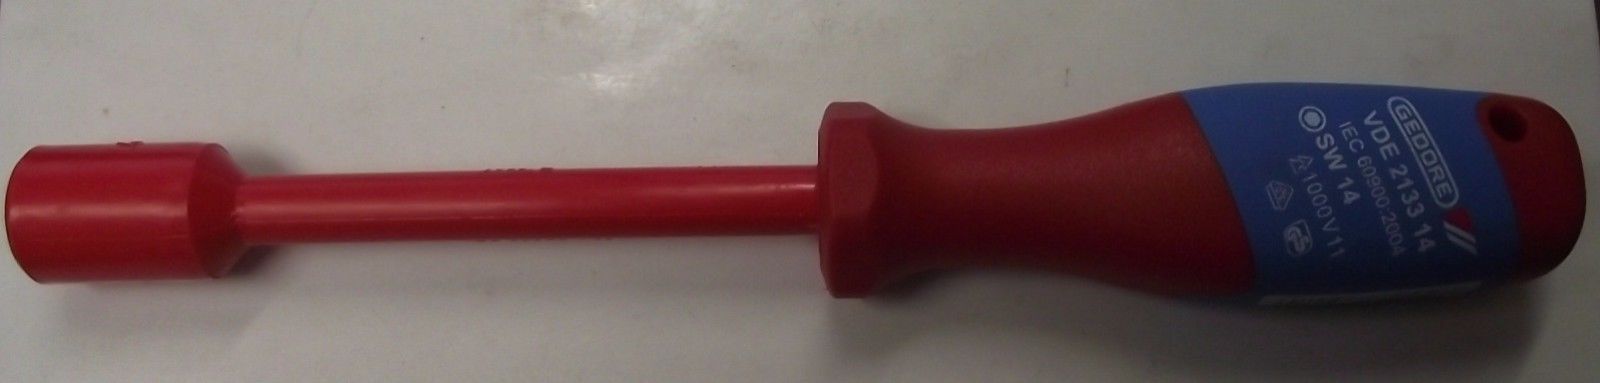 Gedore VDE 2133 14 Vde Insulated Socket Wrench With Handle 14 mm